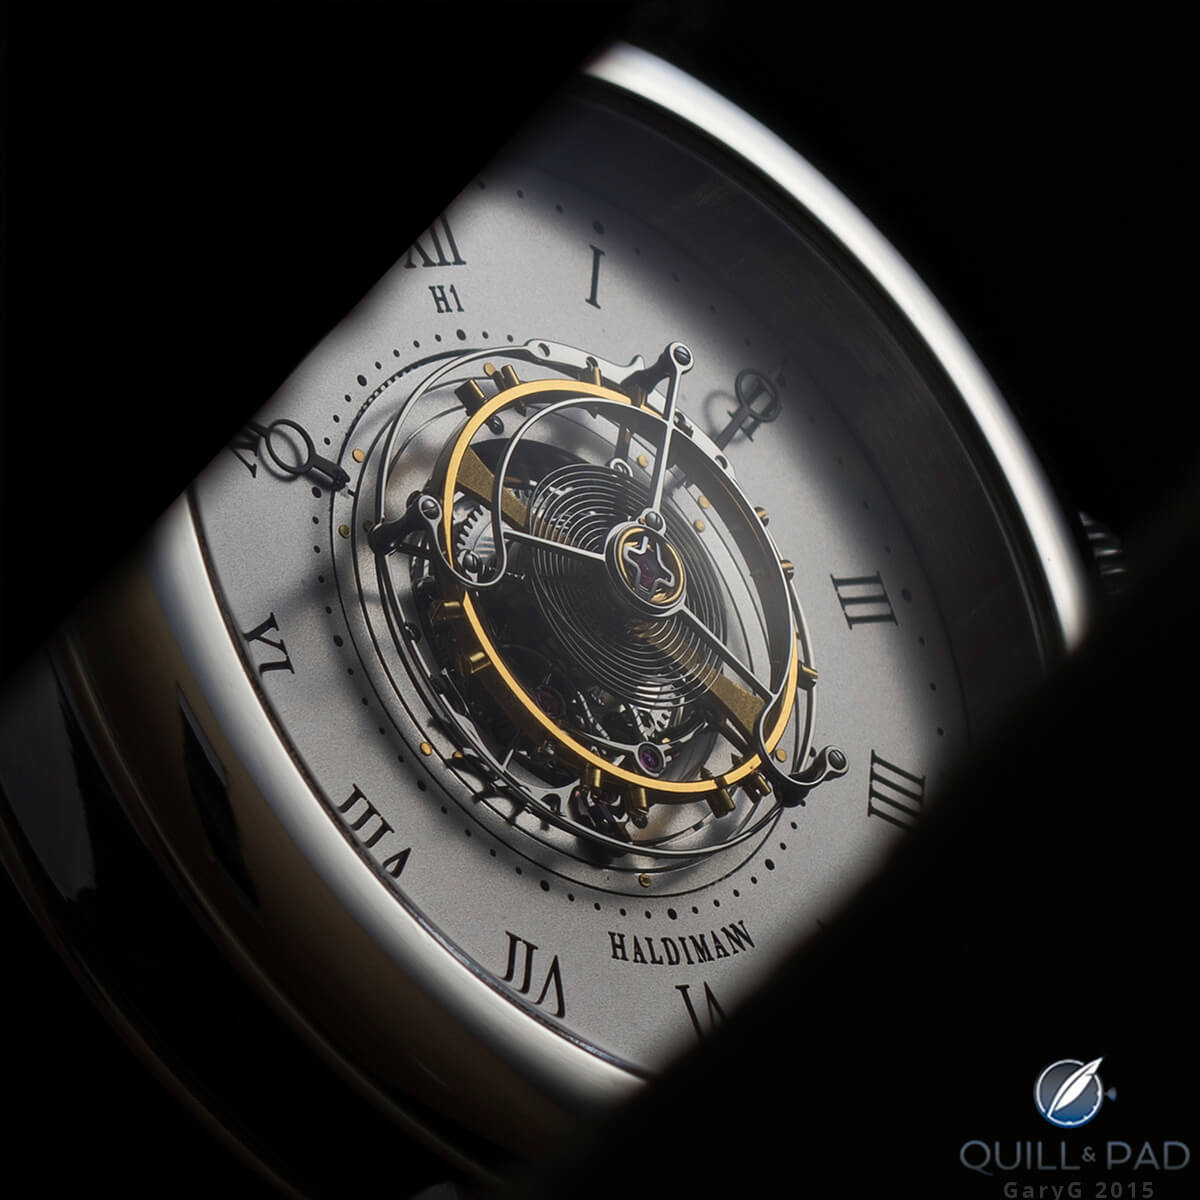 Made by hand: Beat Haldimann’s “singing” tourbillon carriage from the H1